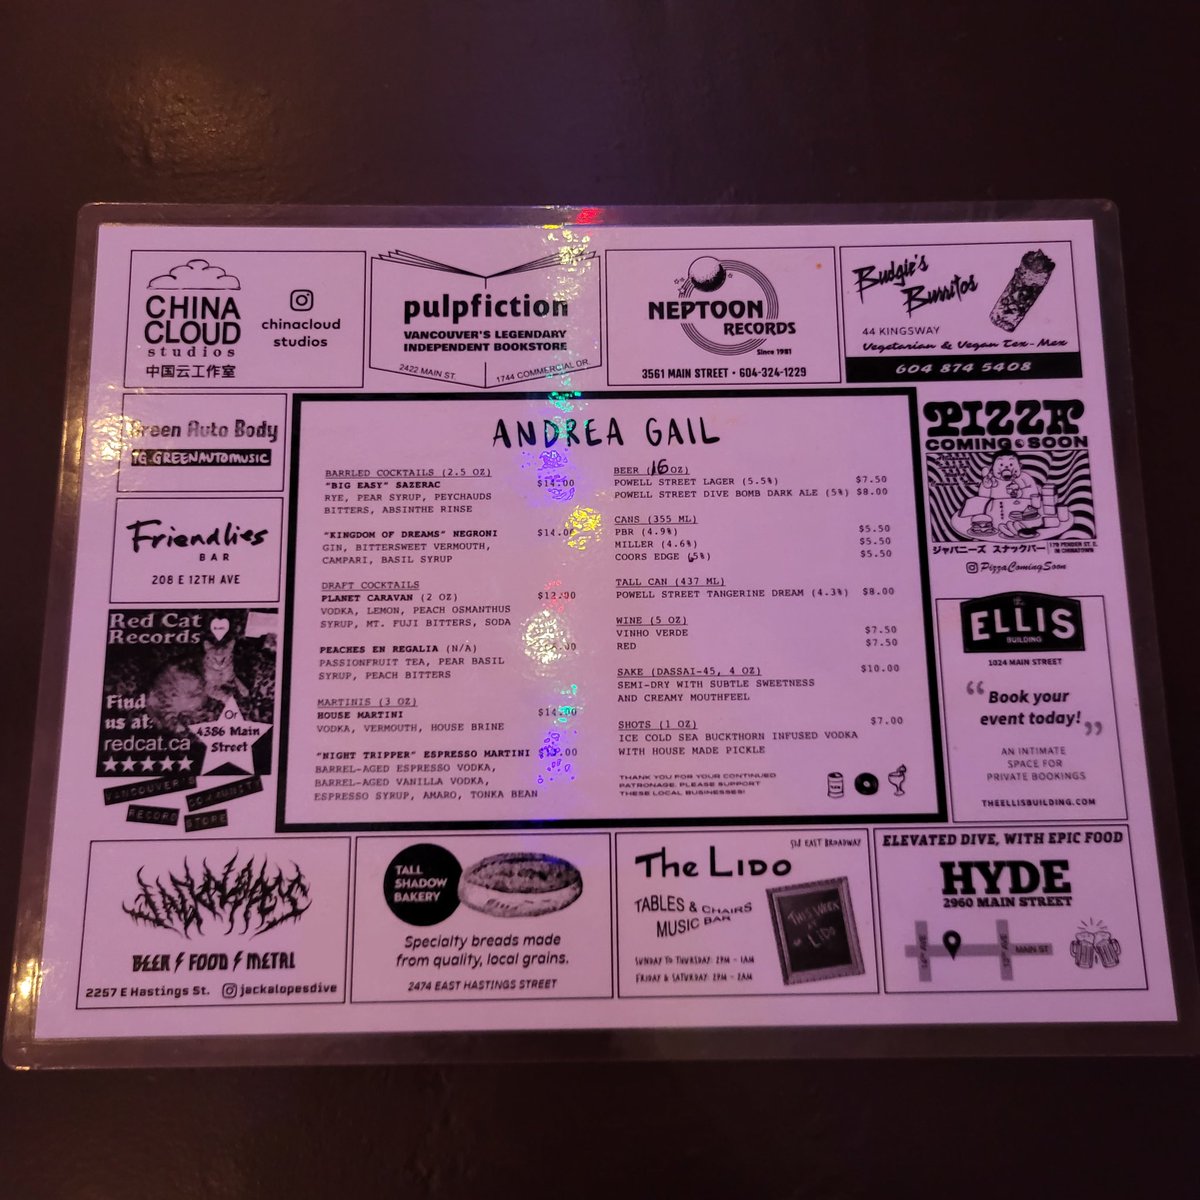 Andrea Gail, Powell Street. Repeatedly revised paper menu & some old Wild Thing favorites. Plus nice plug on the laminated placemat!